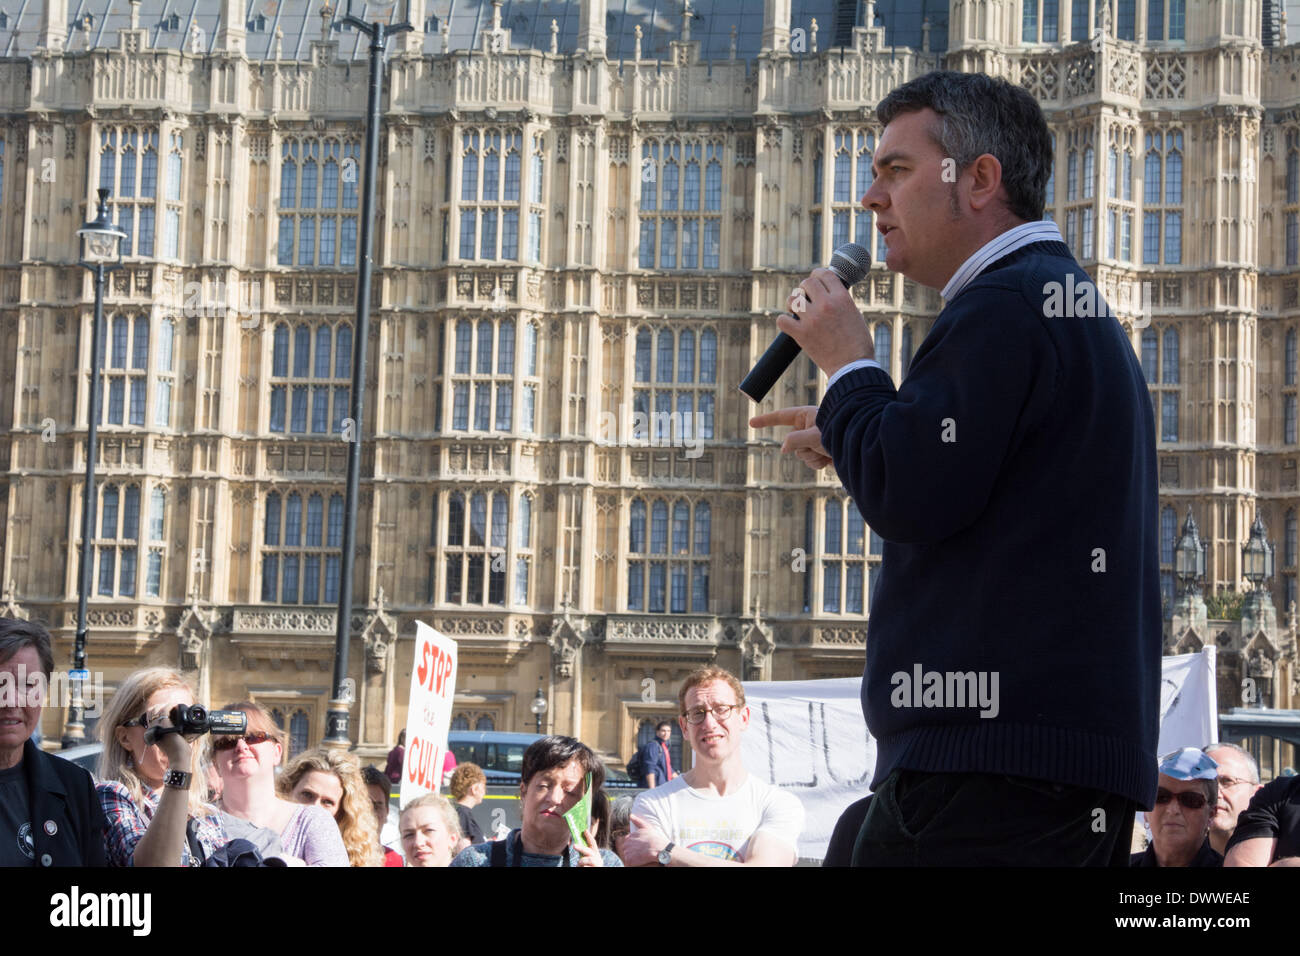 Dominic Dyer of the Badger Trust speaks as protesters gather outside Westminster while a parliamentary debate on the controversial badger cull takes place inside the house of commons. Badgers have been linked to the spread of bovine tuberculosis in cattle and experimental culls of badgers were carried out in 2013 in an attempt to stop the spread of the disease. Anti-cull protestors have claimed that the cull is inefficient, inhumane and scientifically flawed. Stock Photo